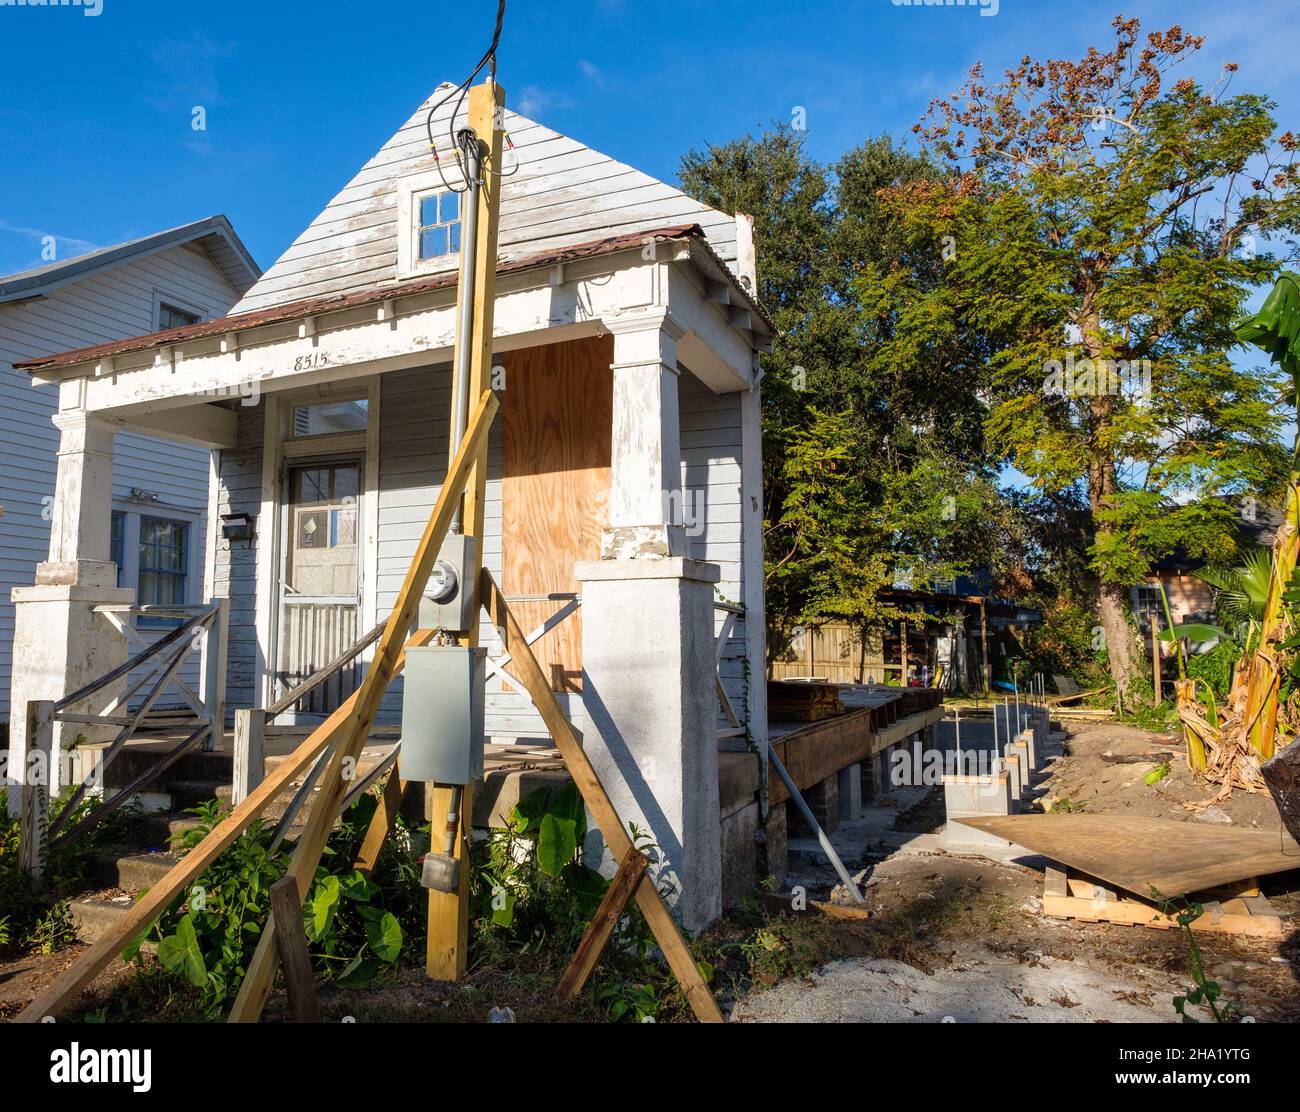 NEW ORLEANS, LA, USA - DECEMBER 5, 2021: Front view of house under construction in Uptown Neighborhood using old facade Stock Photo